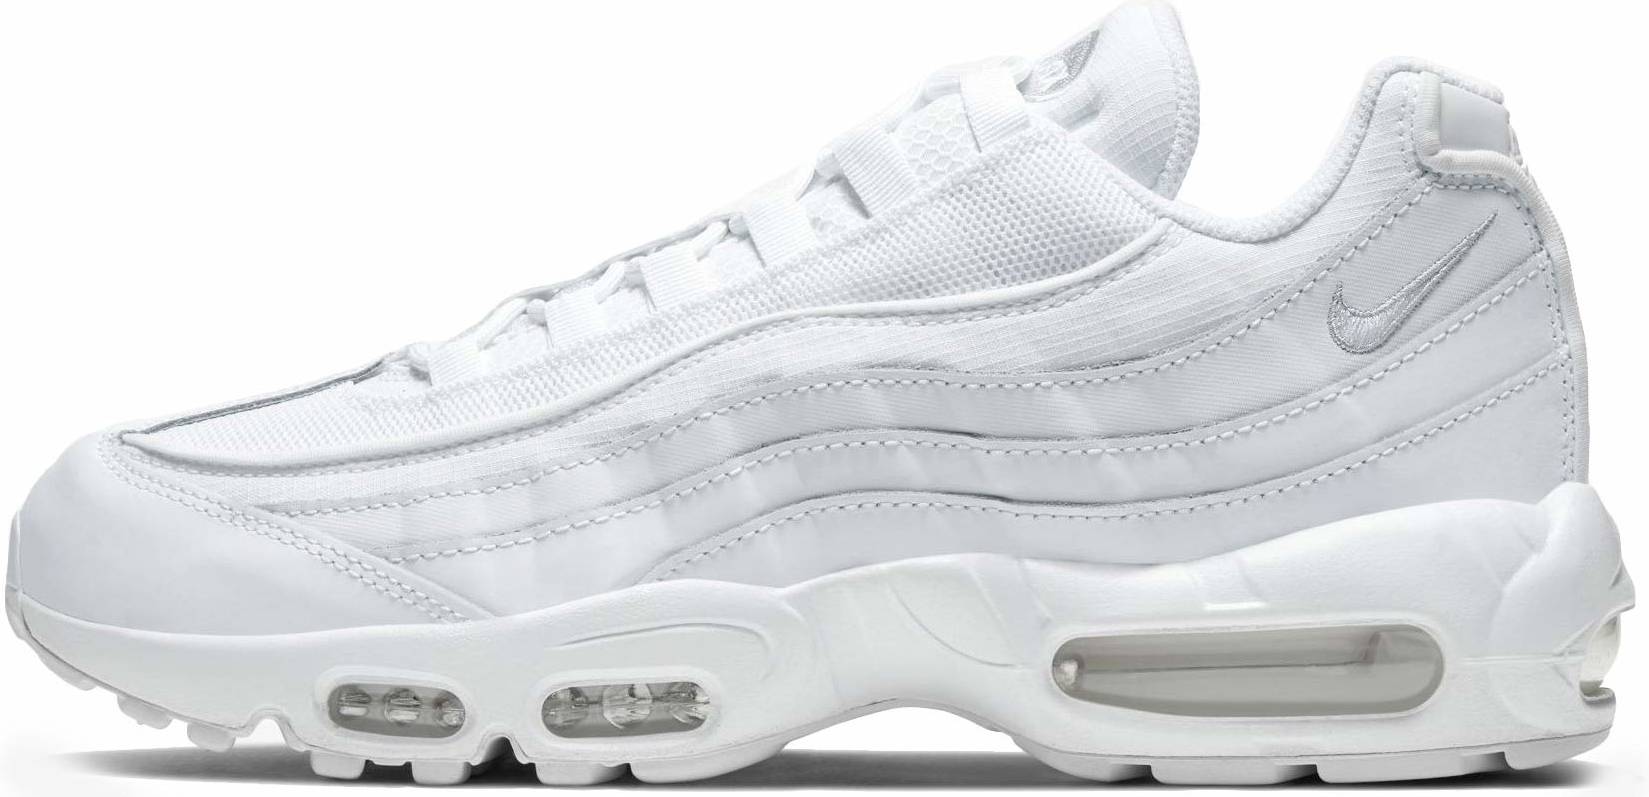 Nike Air Max 95 Essential sneakers in 30+ colors (only $110 